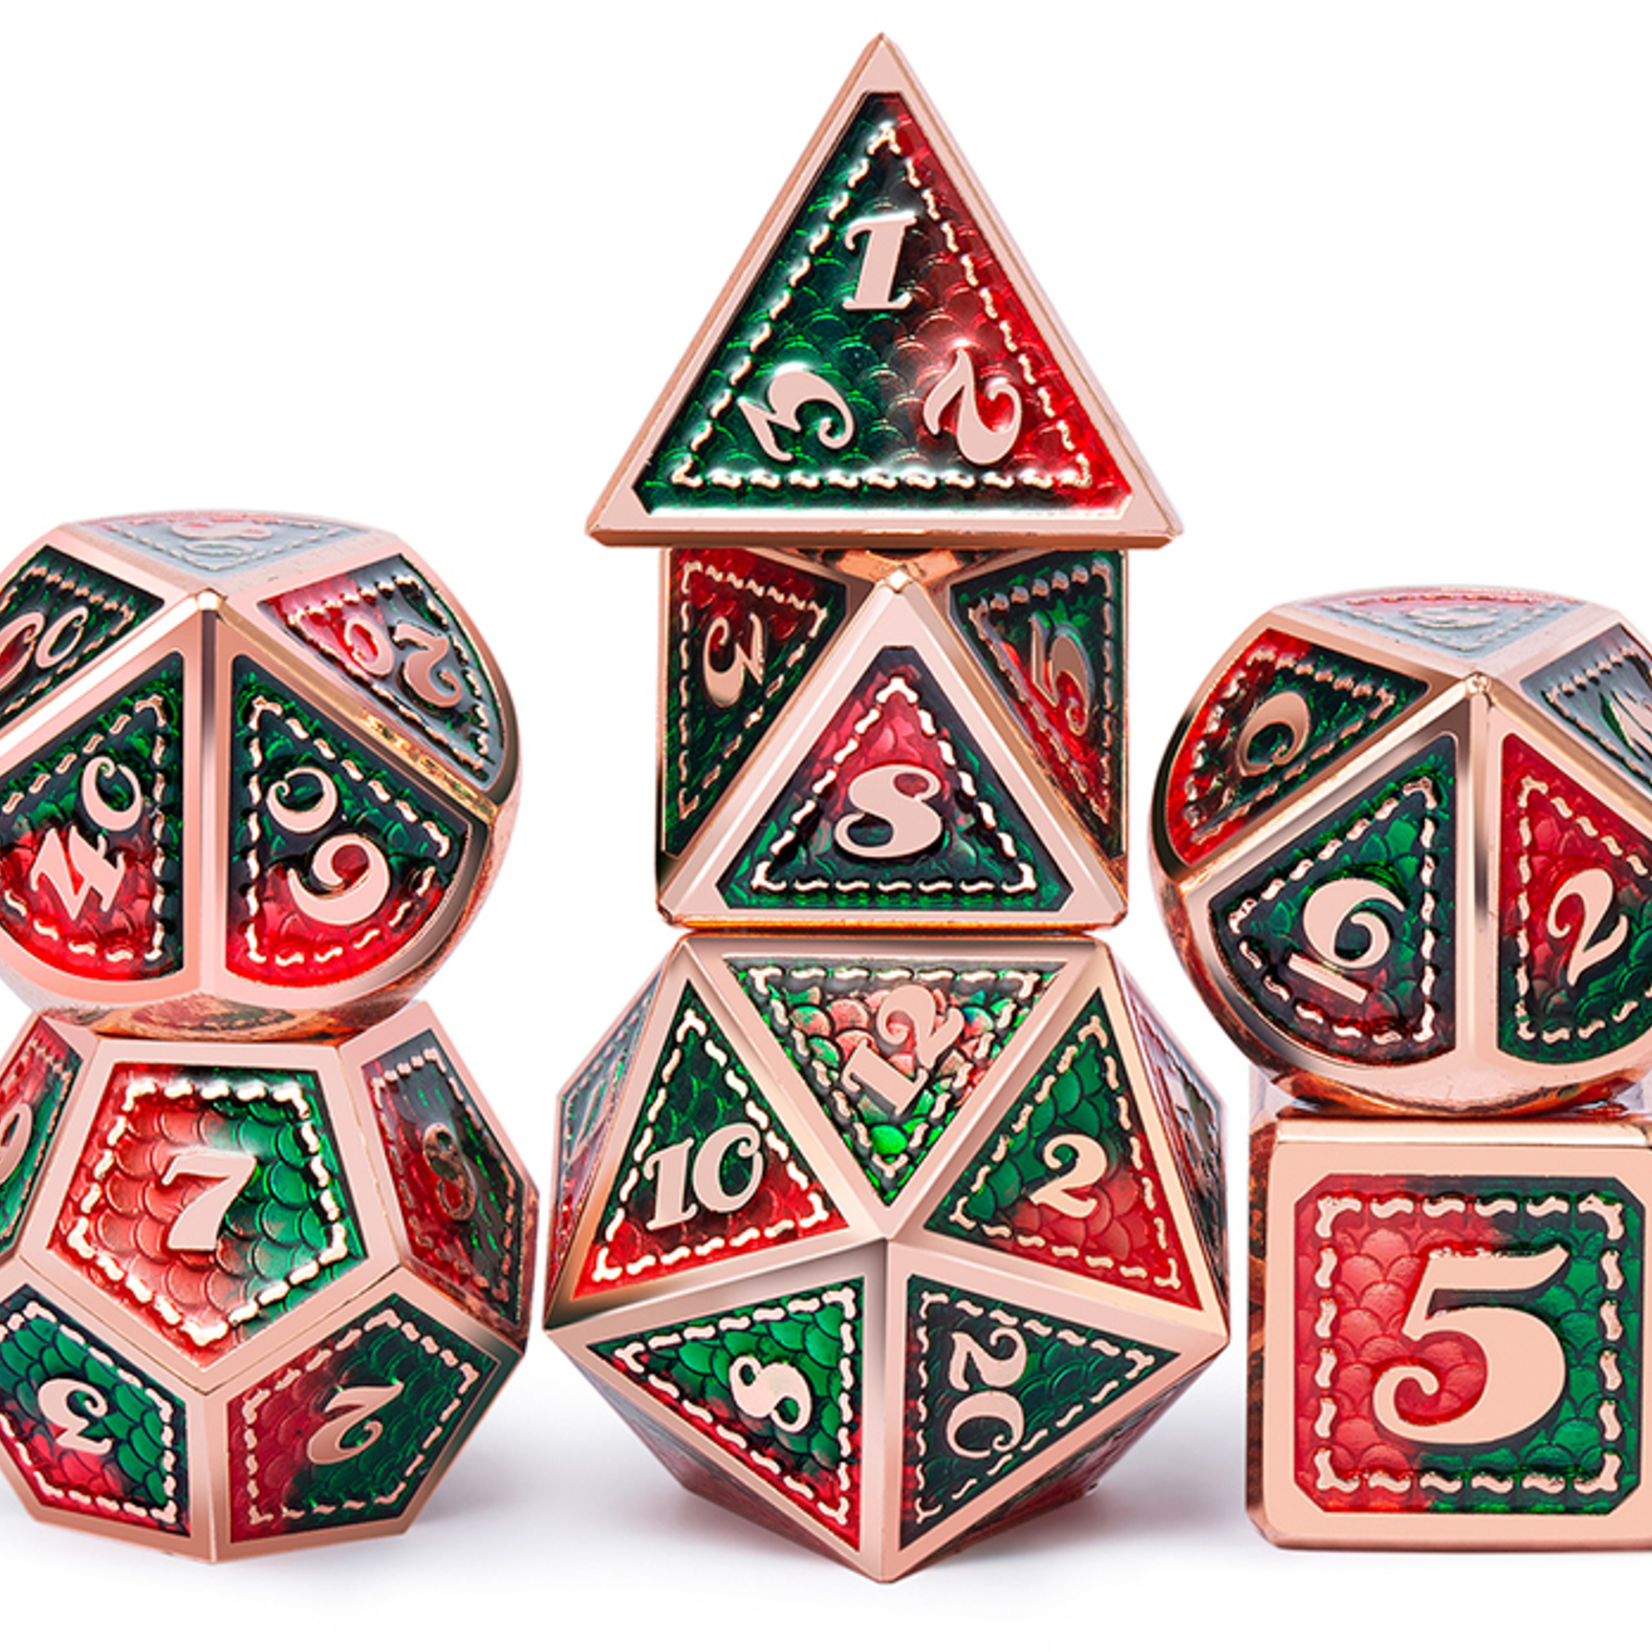 Dice Habit Quetzal Red / Green with Gold Metal Polyhedral 7 die set